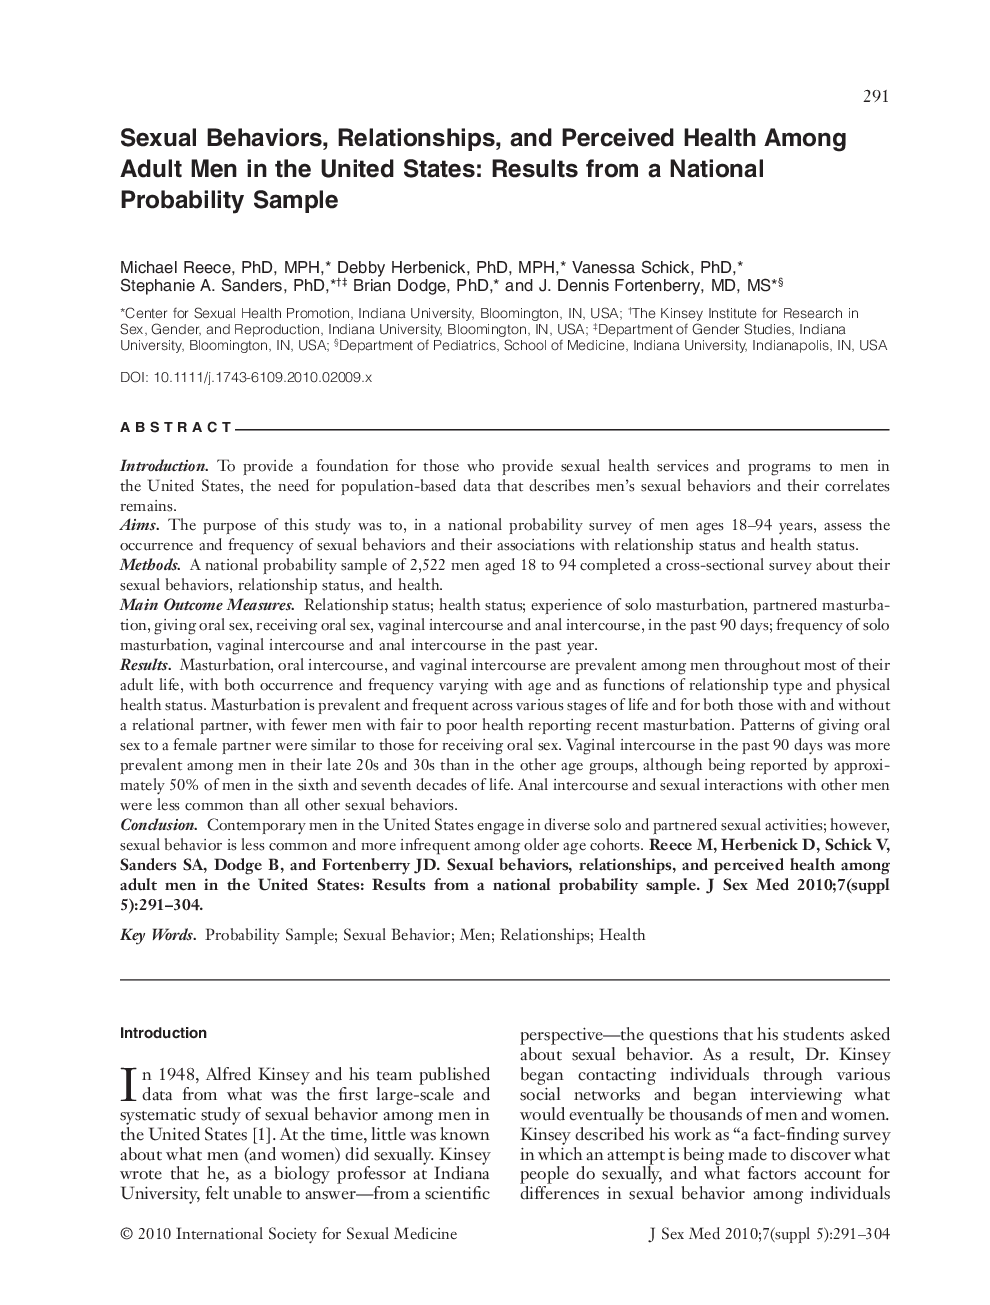 Sexual Behaviors, Relationships, and Perceived Health Among Adult Men in the United States: Results from a National Probability Sample